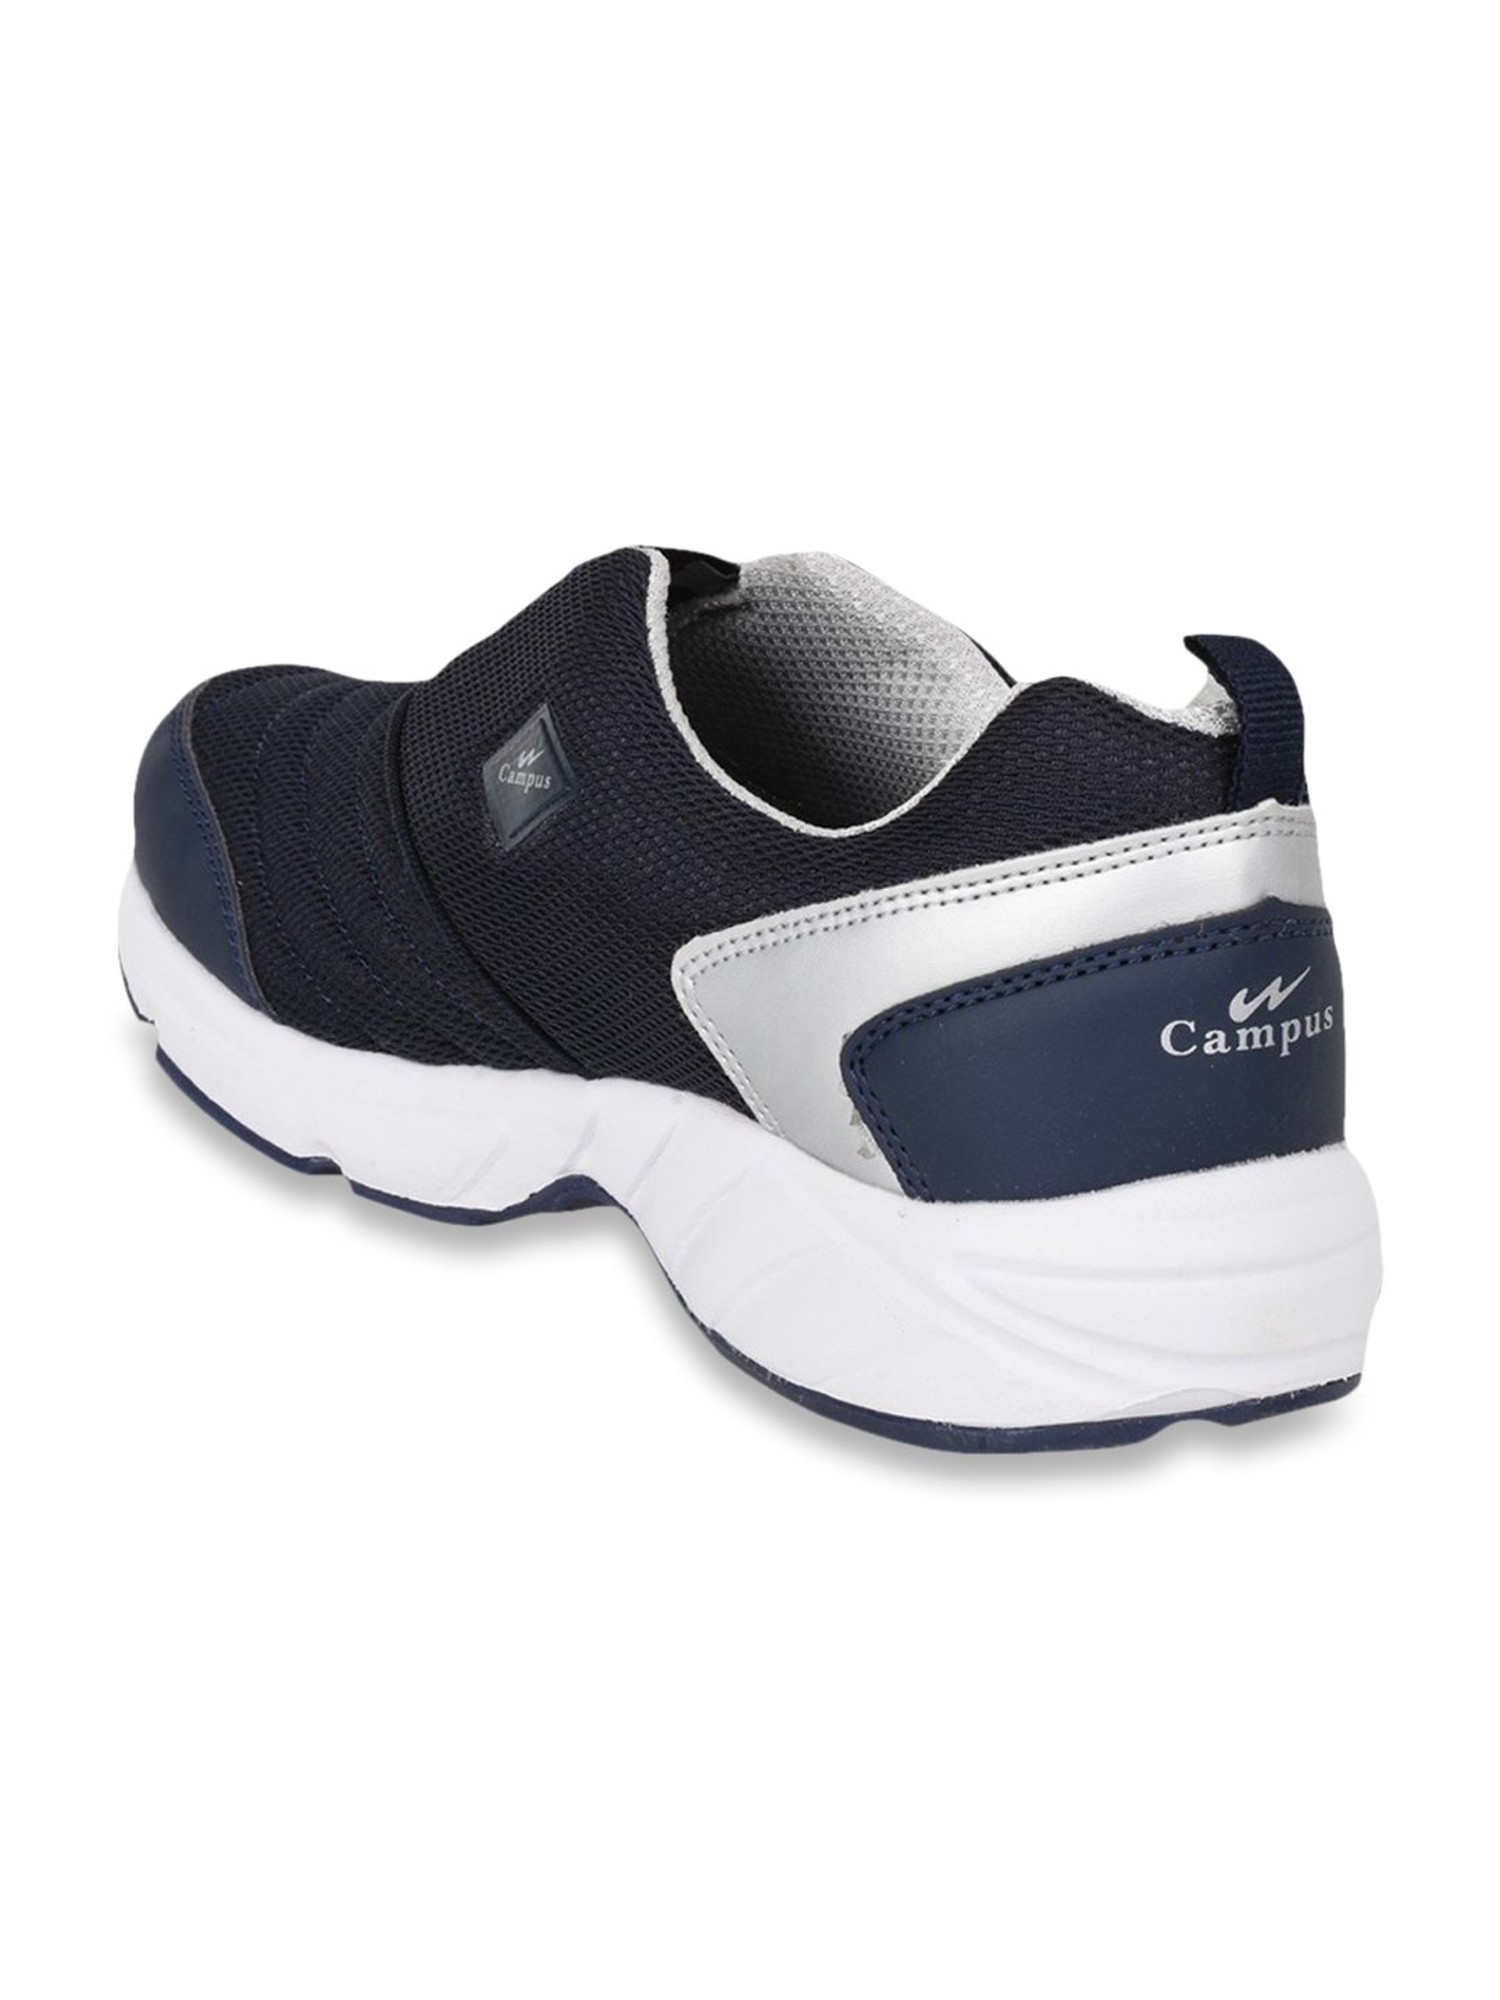 Campus Montaya Navy Walking Shoes from 